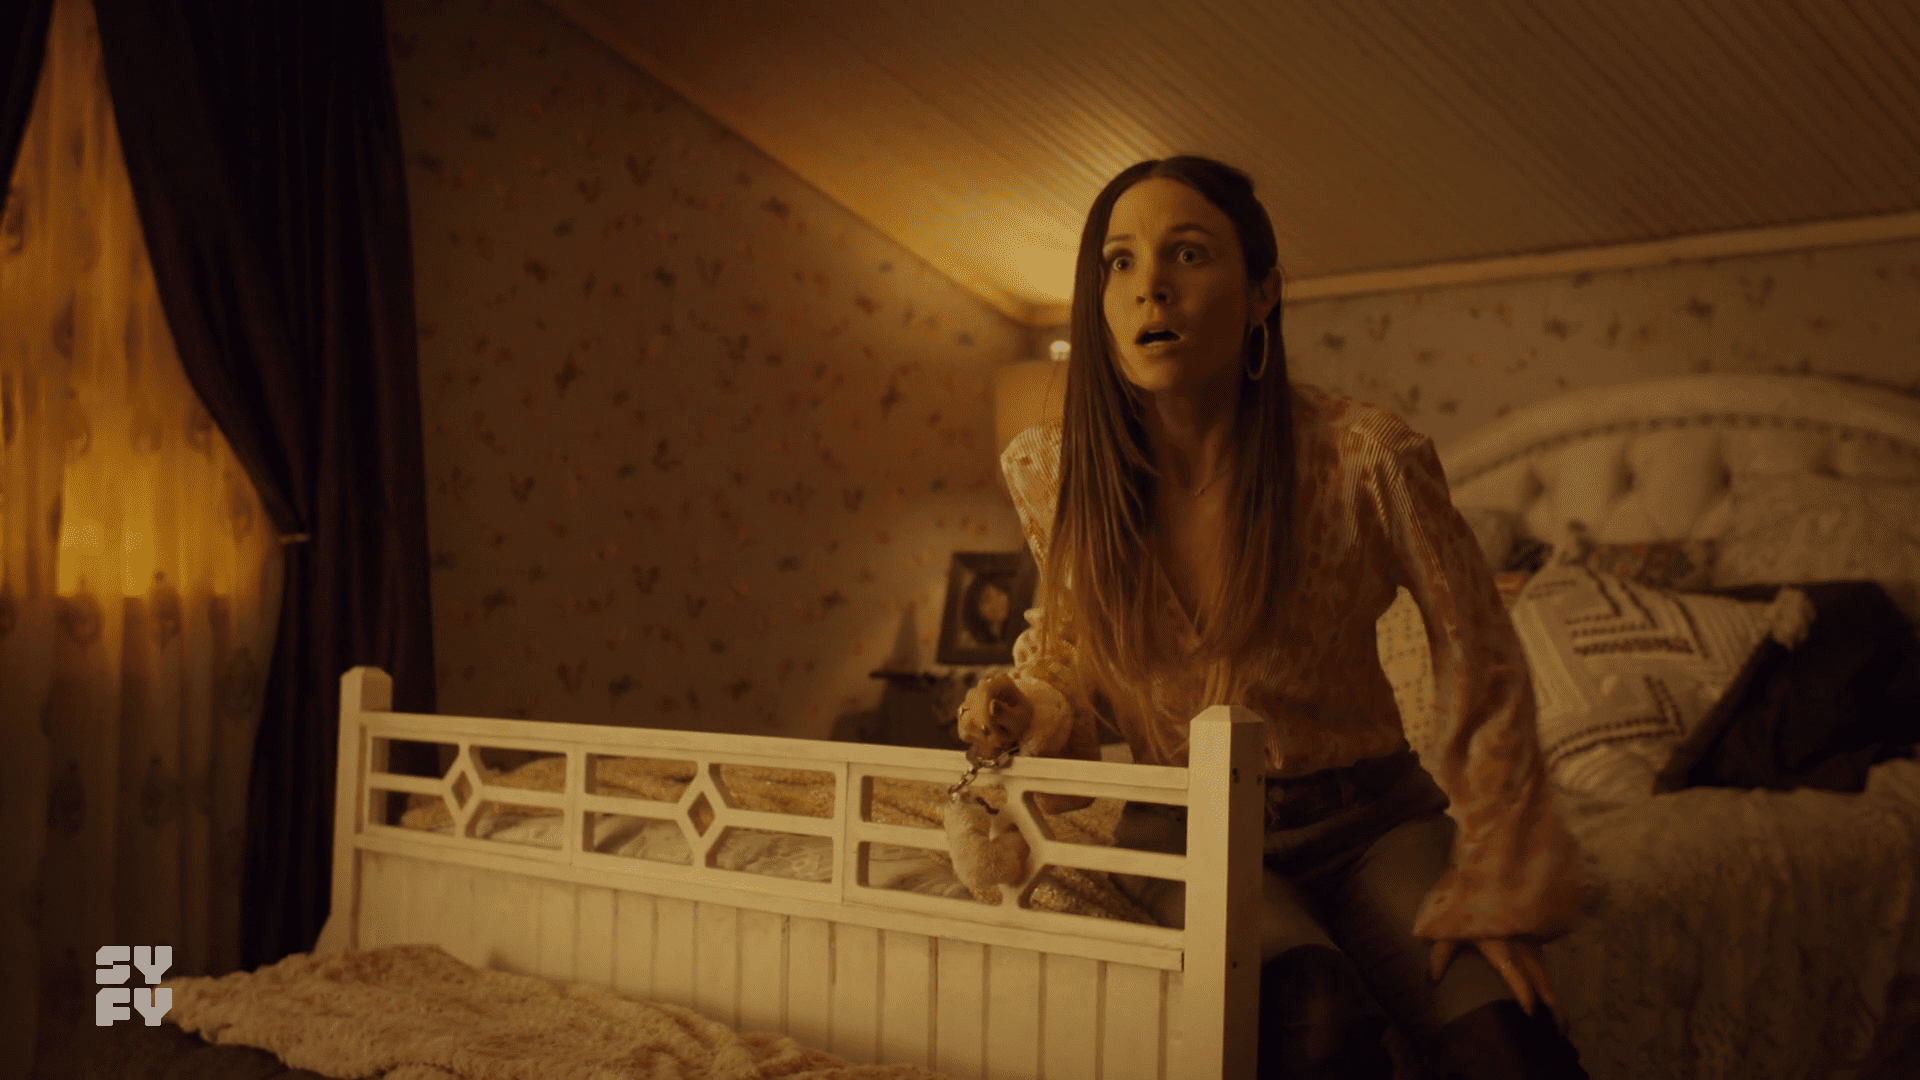 Waverly handcuffed to the bed, in a not fun way.